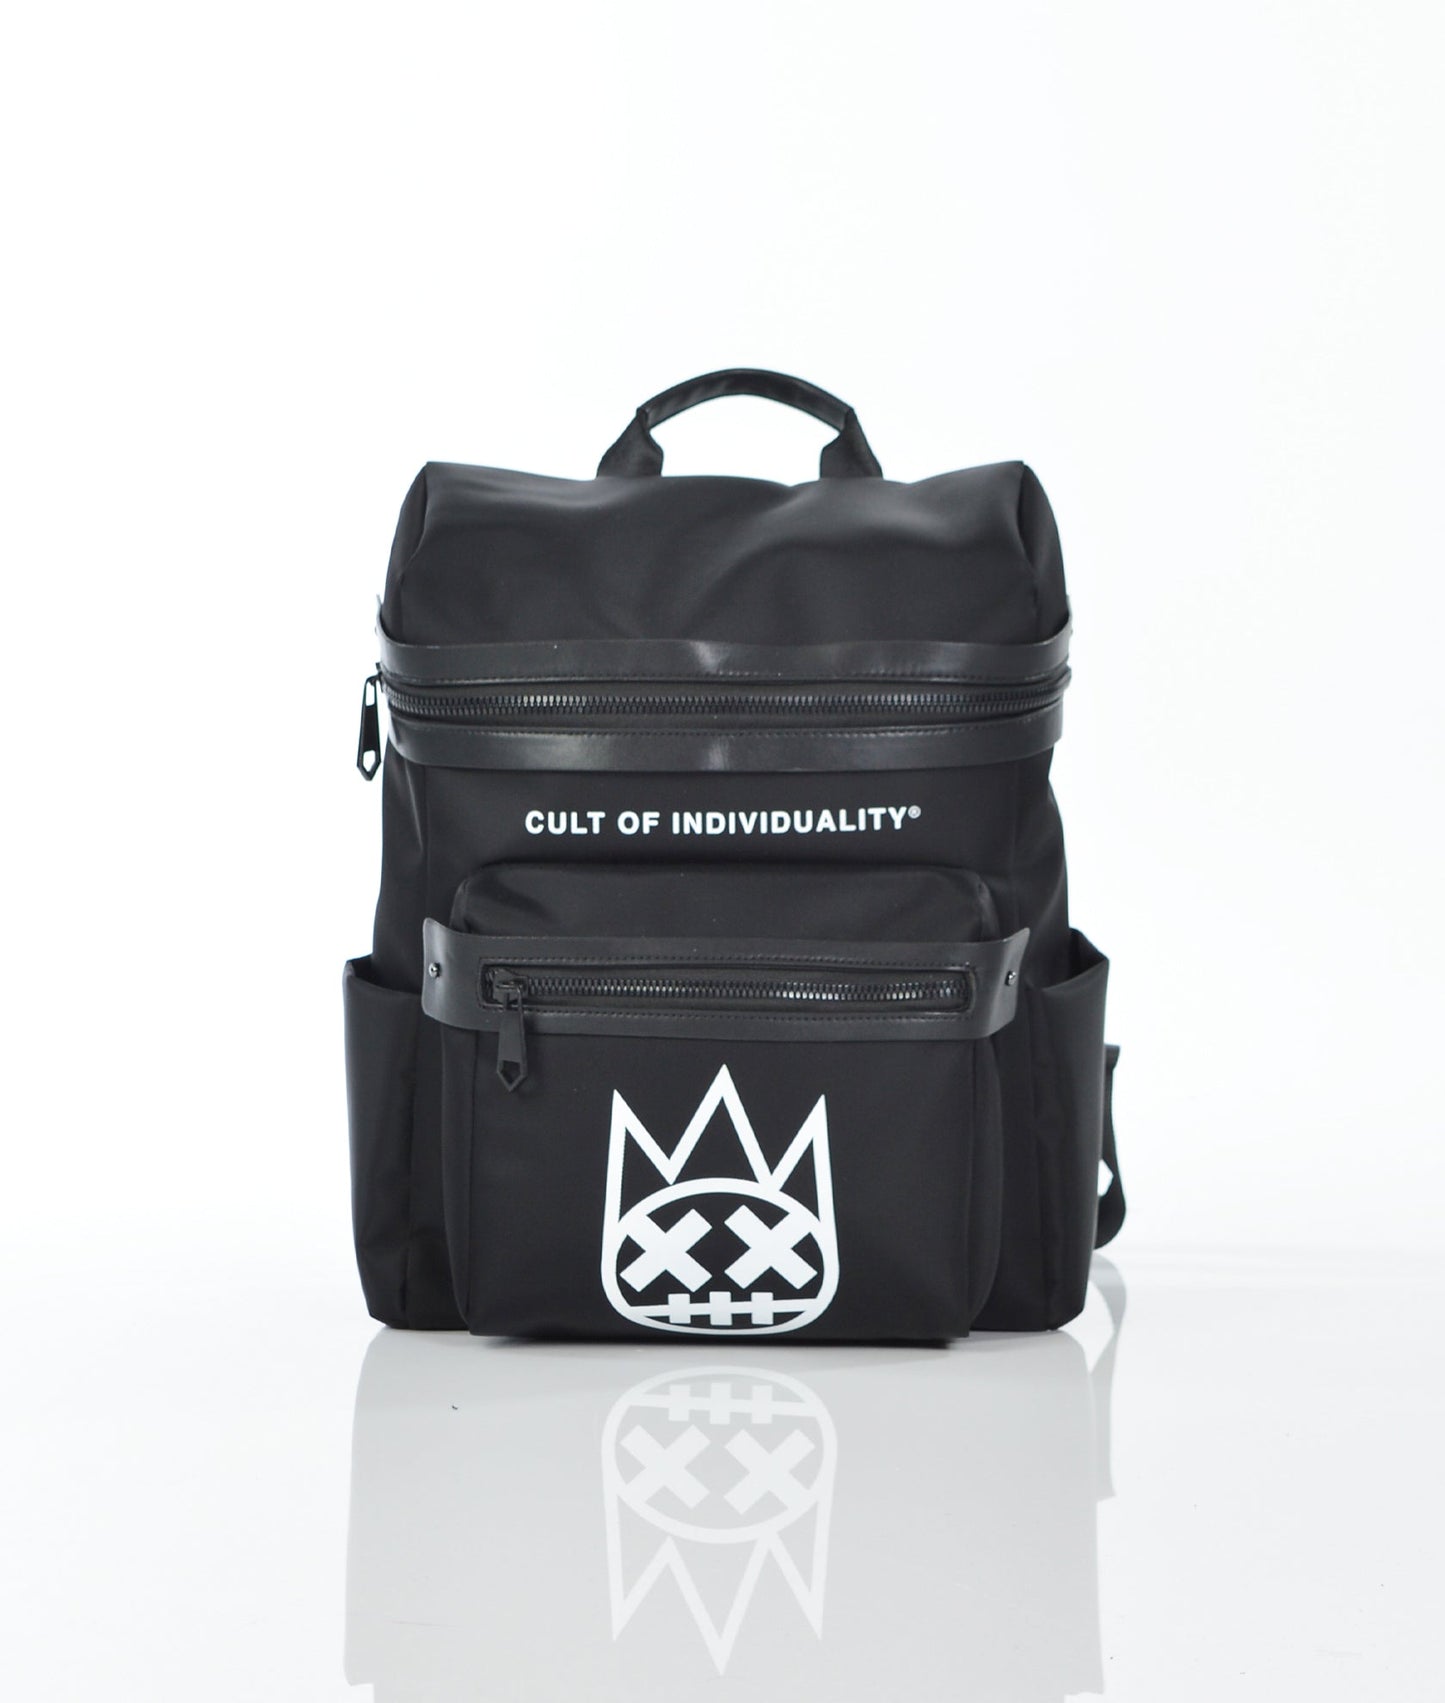 cult of individuality - BACKPACK IN BLACK